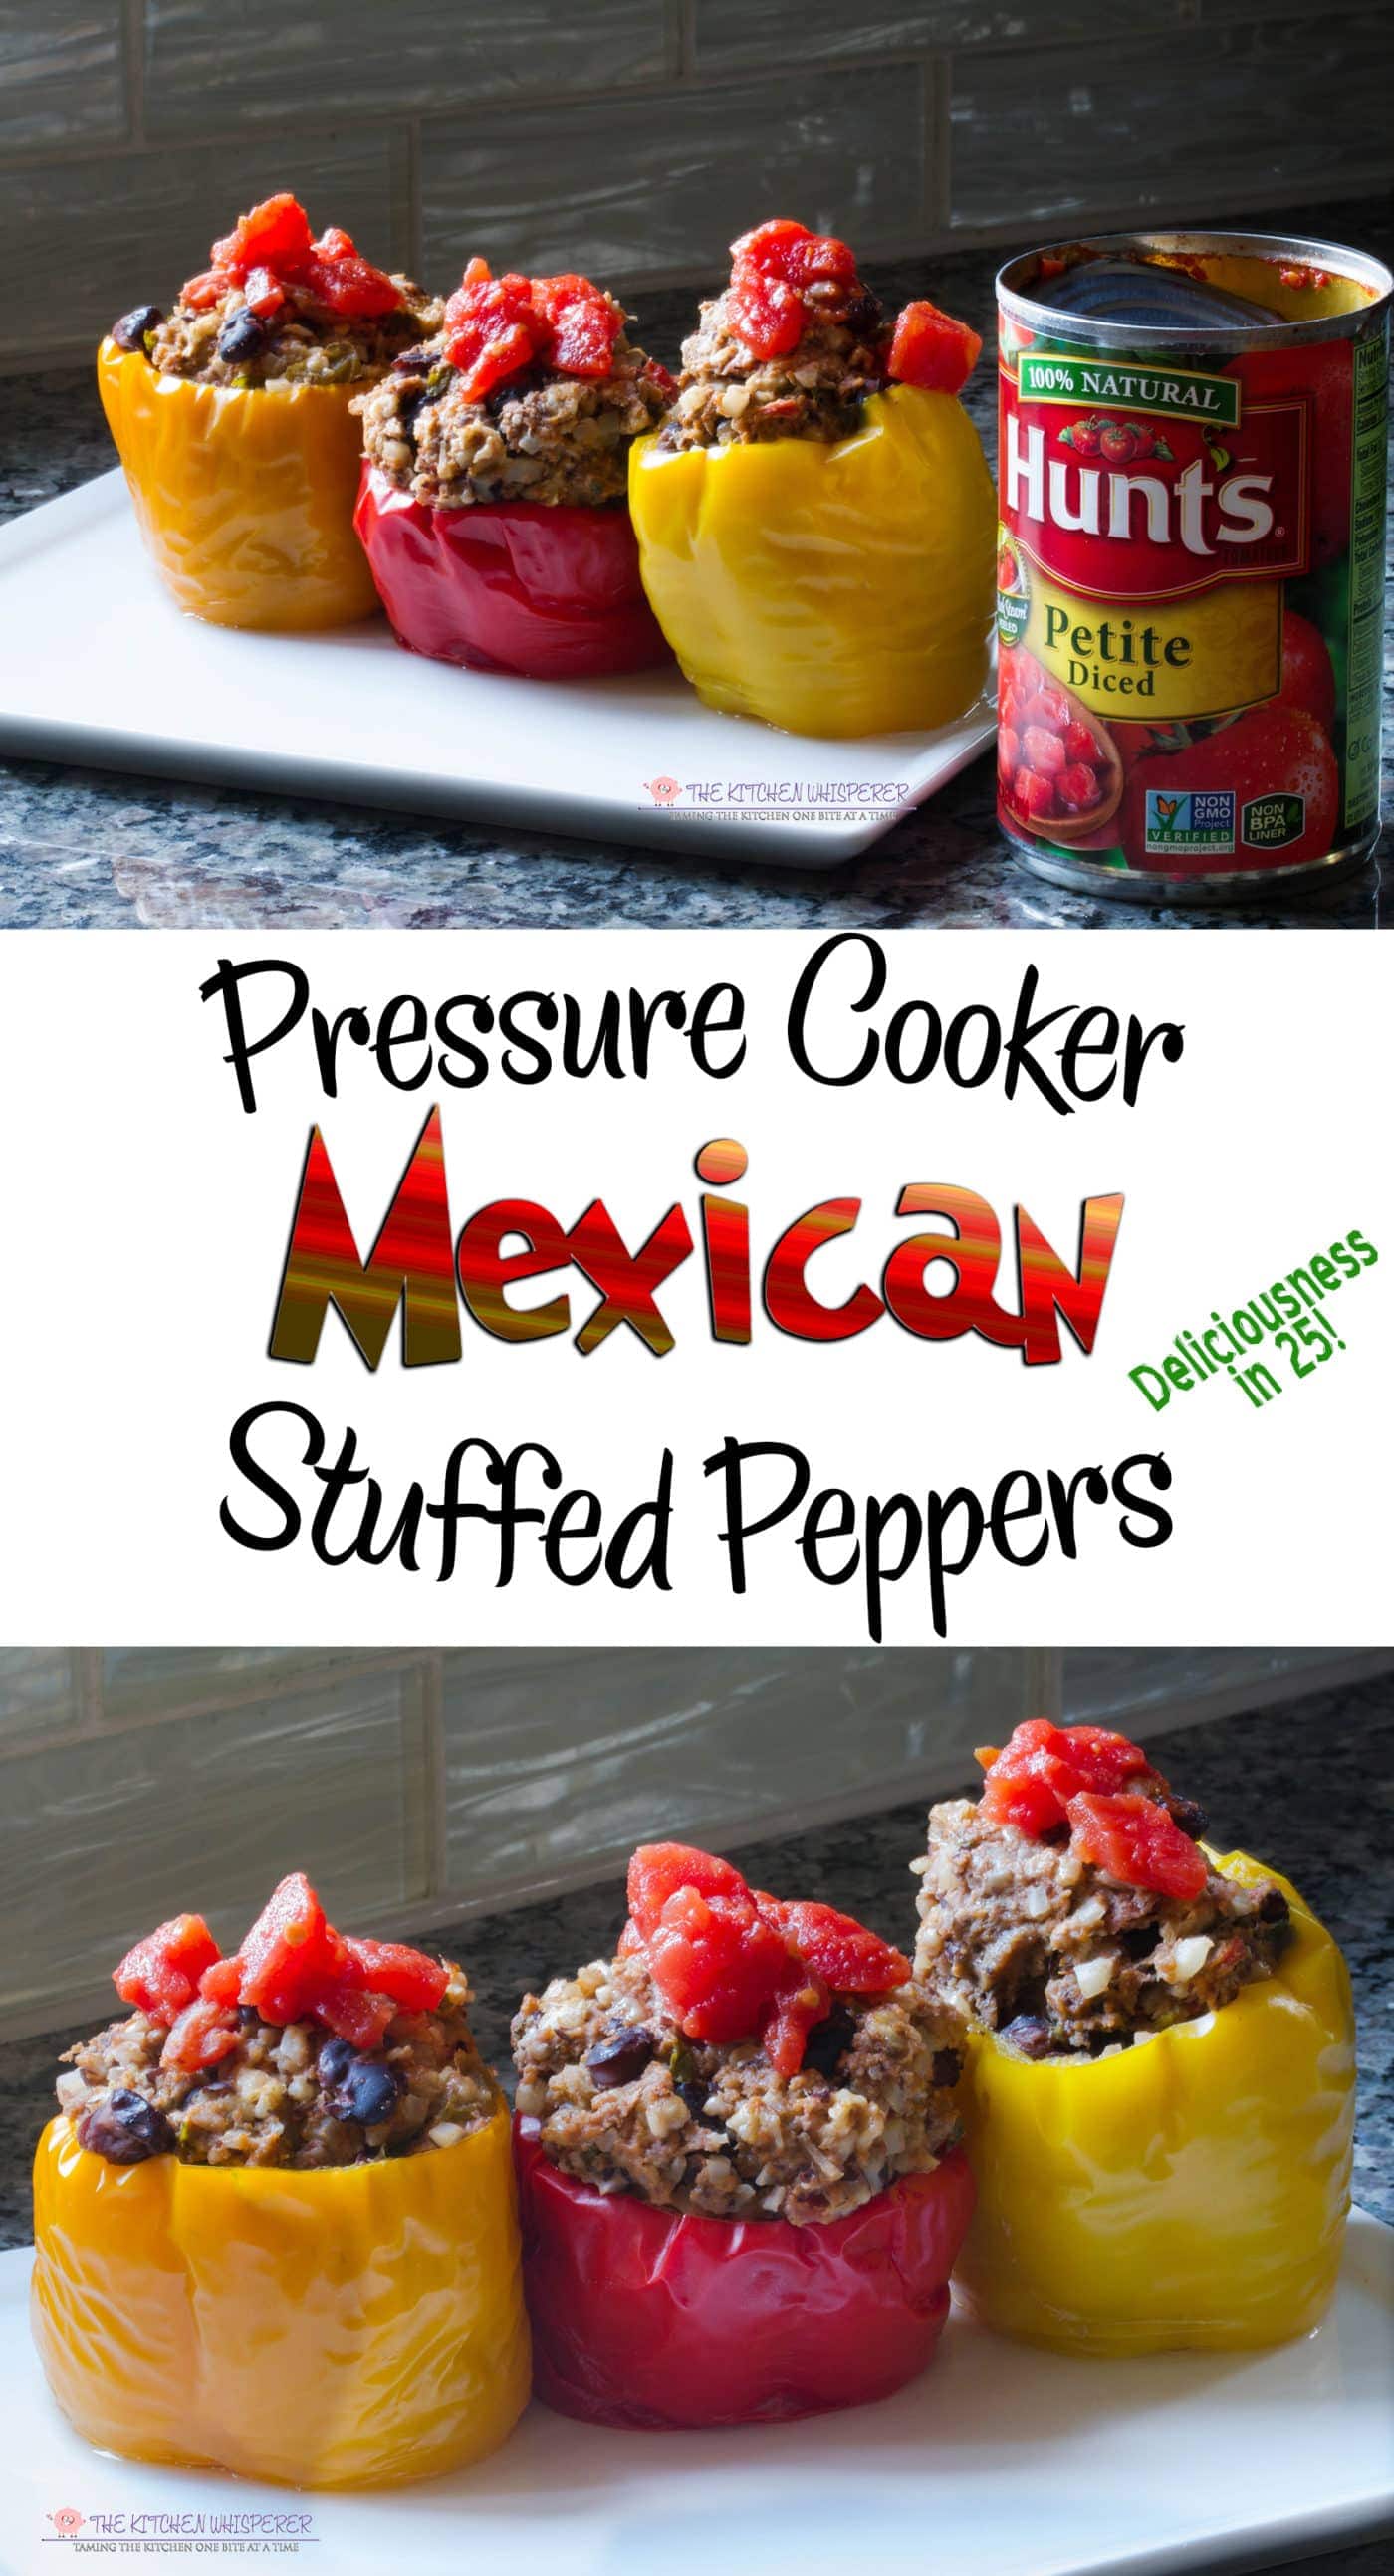 Pressure Cooker Mexican Stuffed Peppers